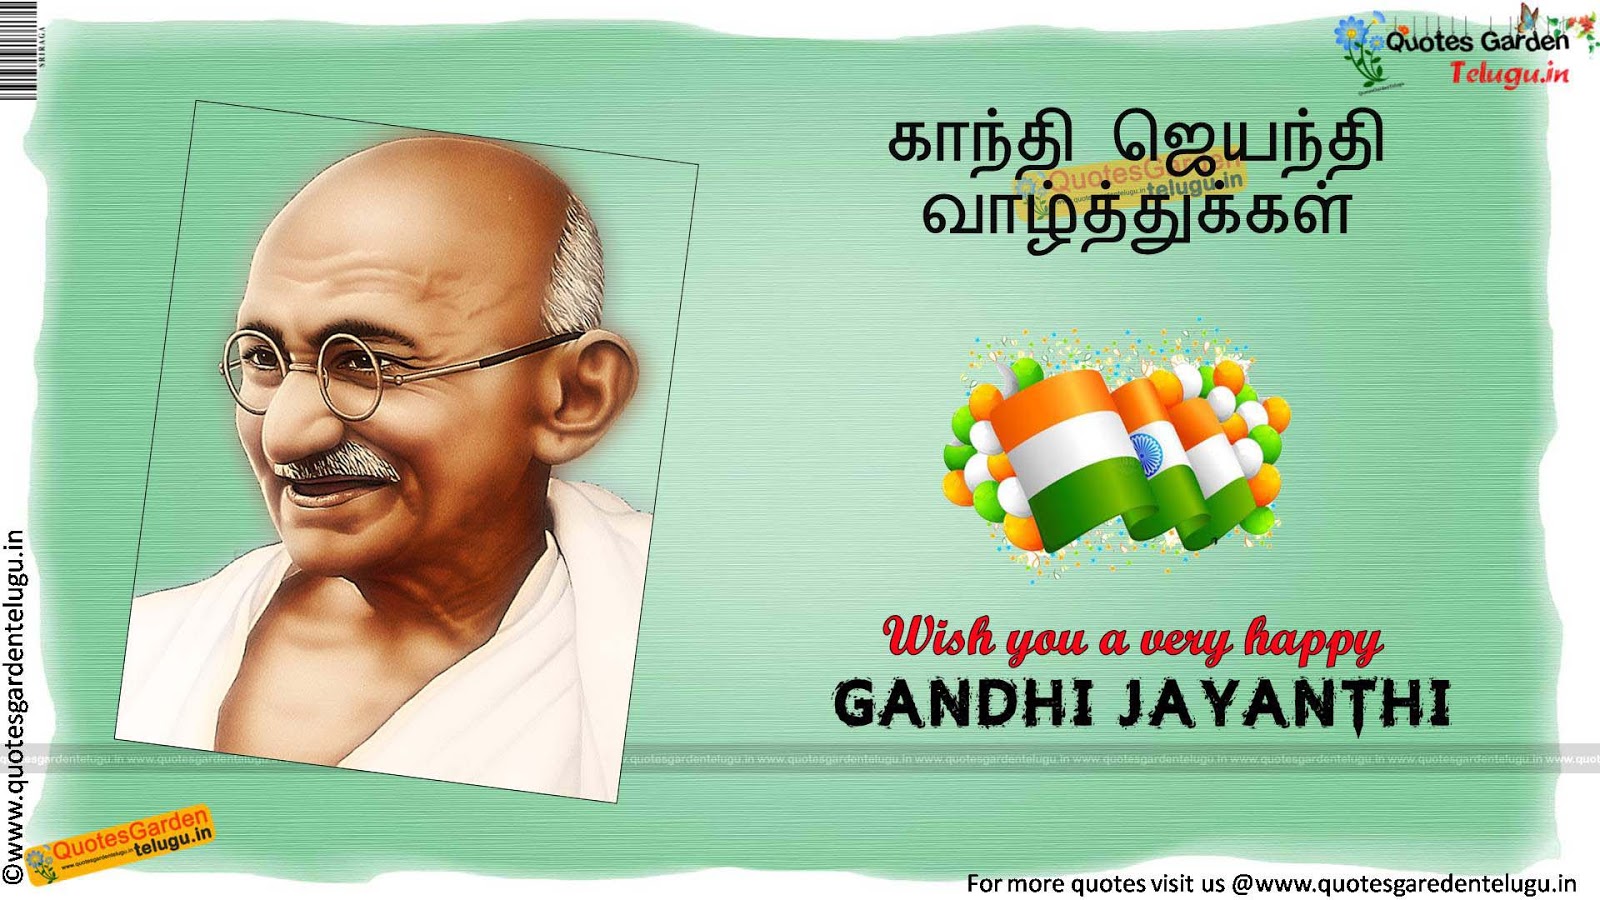 Gandhi Jayanti Quotes Greetings Wishes Wallpapers in Tamil ...